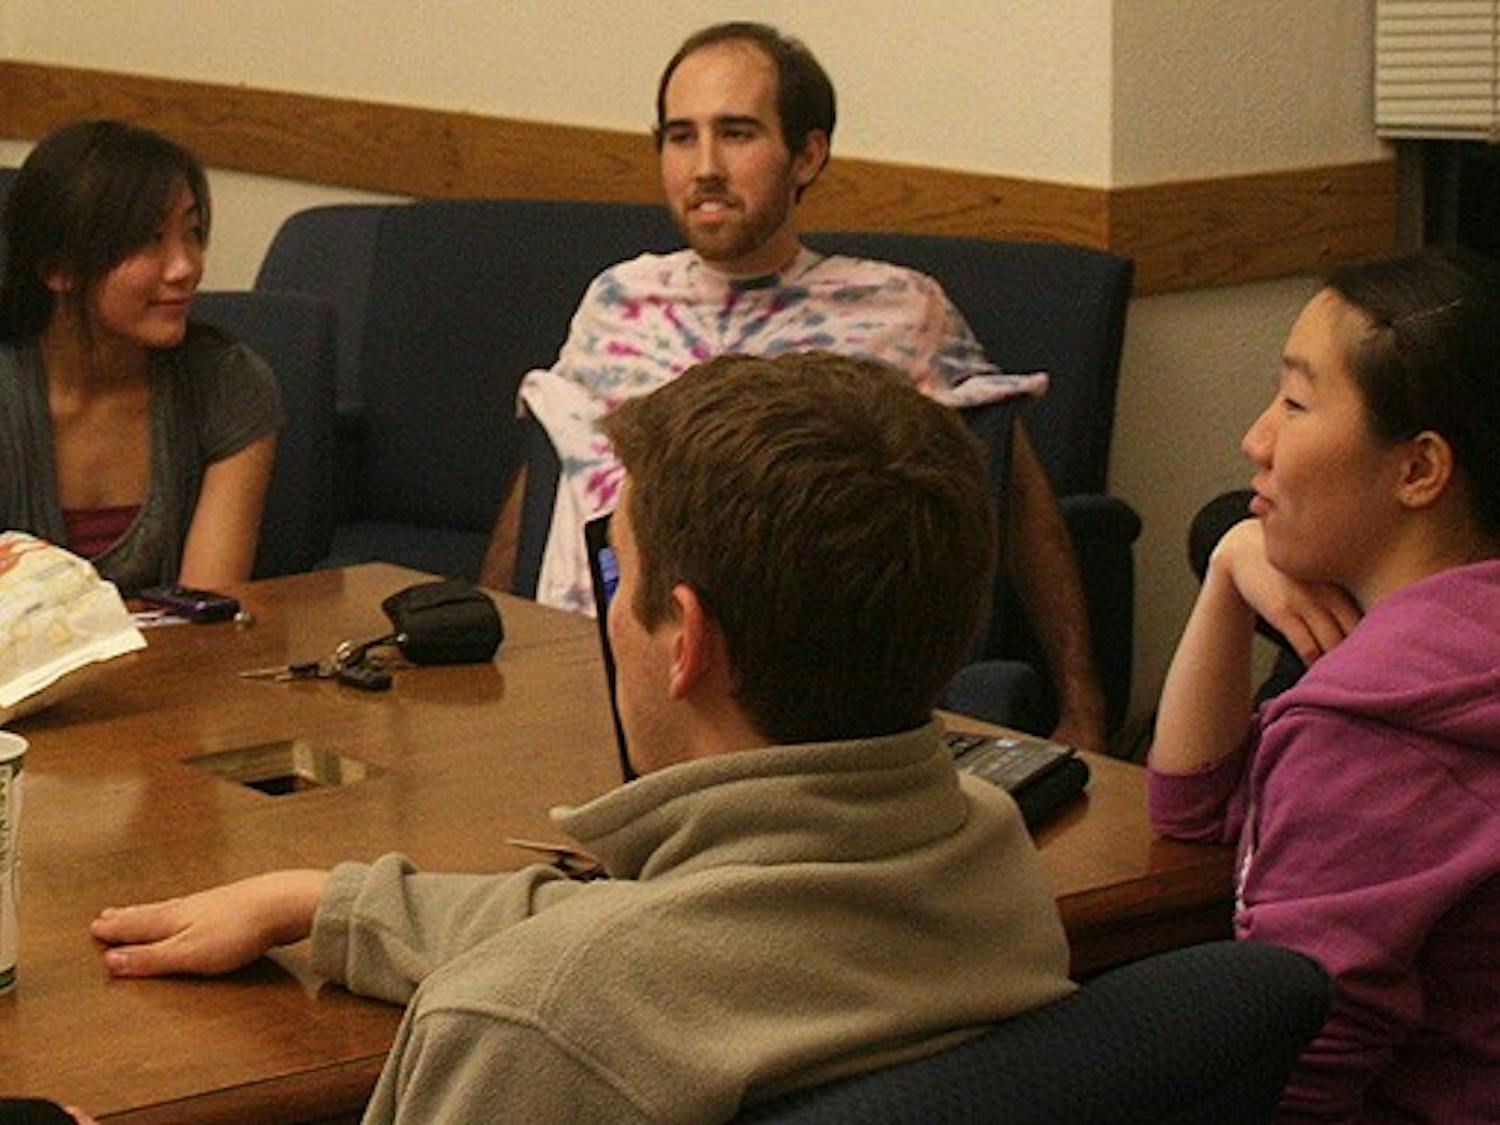 Duke University Union members discussed ways to make the group more visible on campus and recruit more underclassmen as Union members at their meeting Tuesday night.